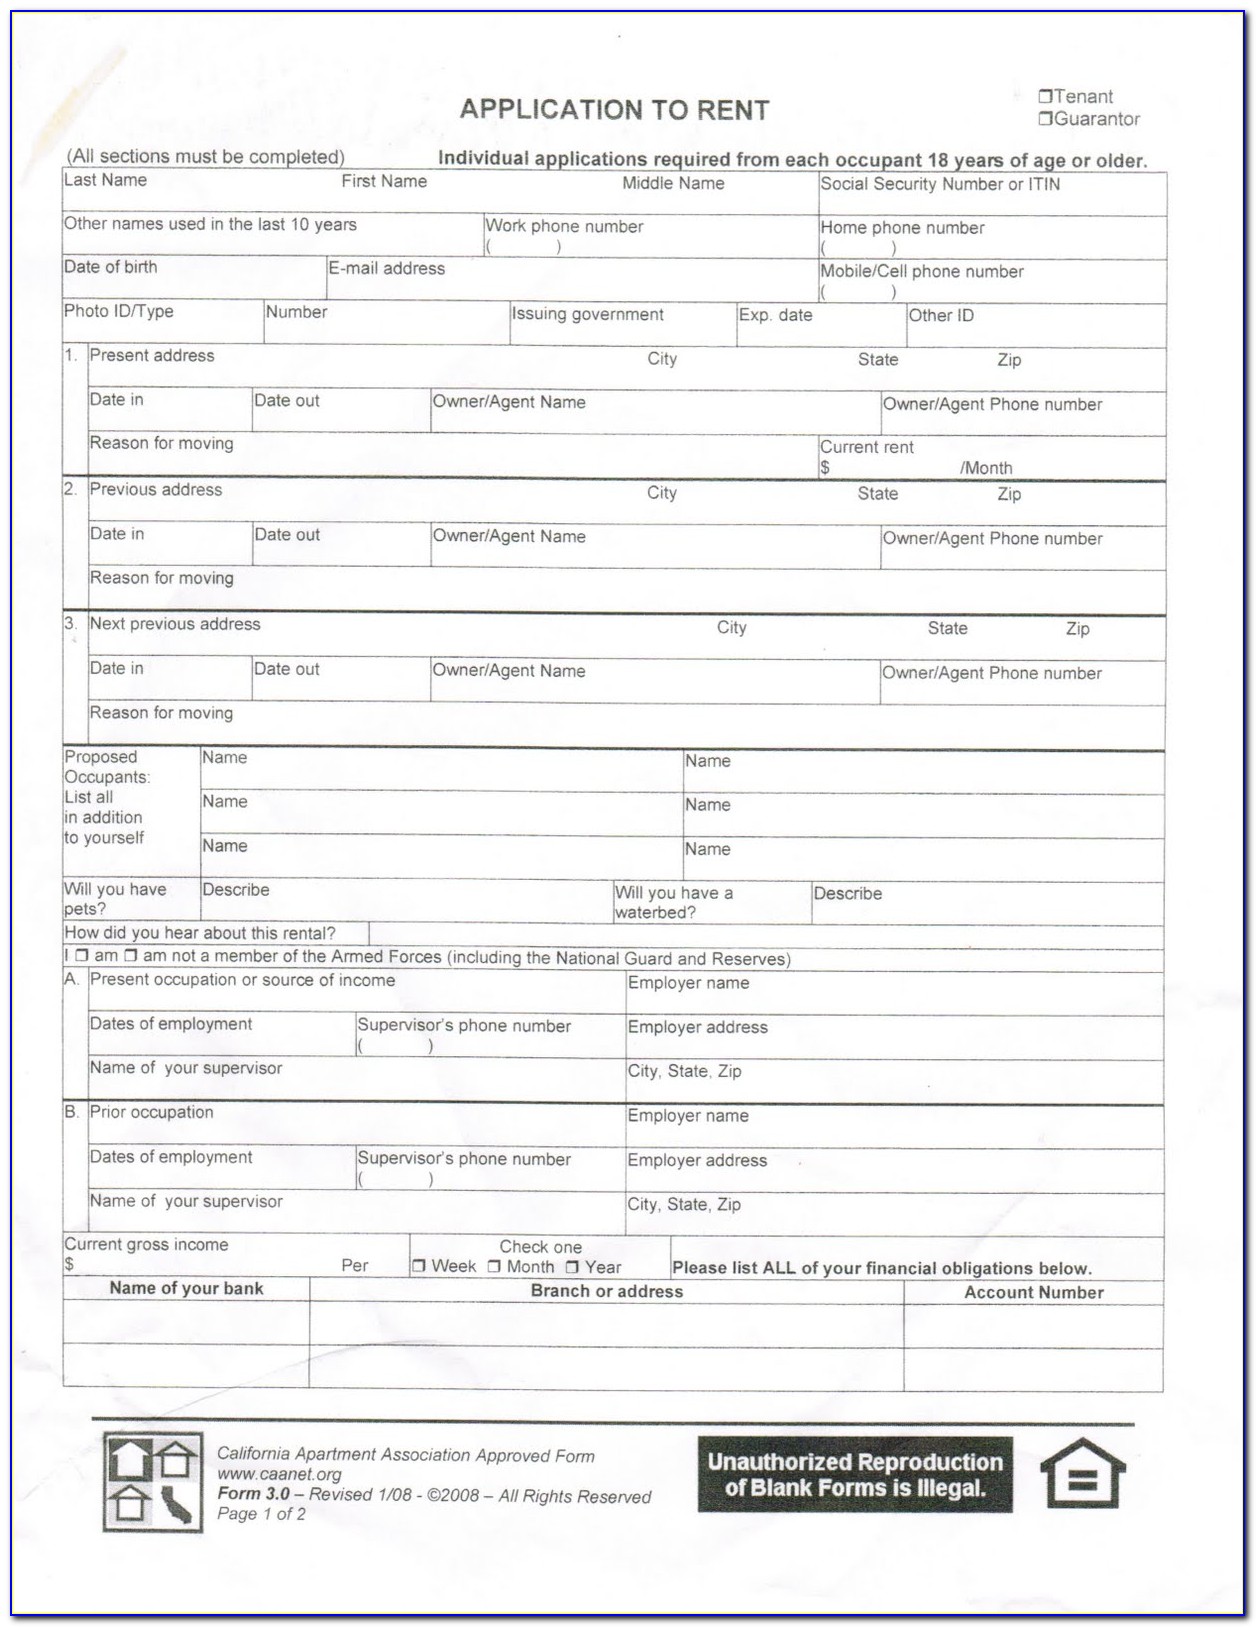 Staples Real Estate Forms